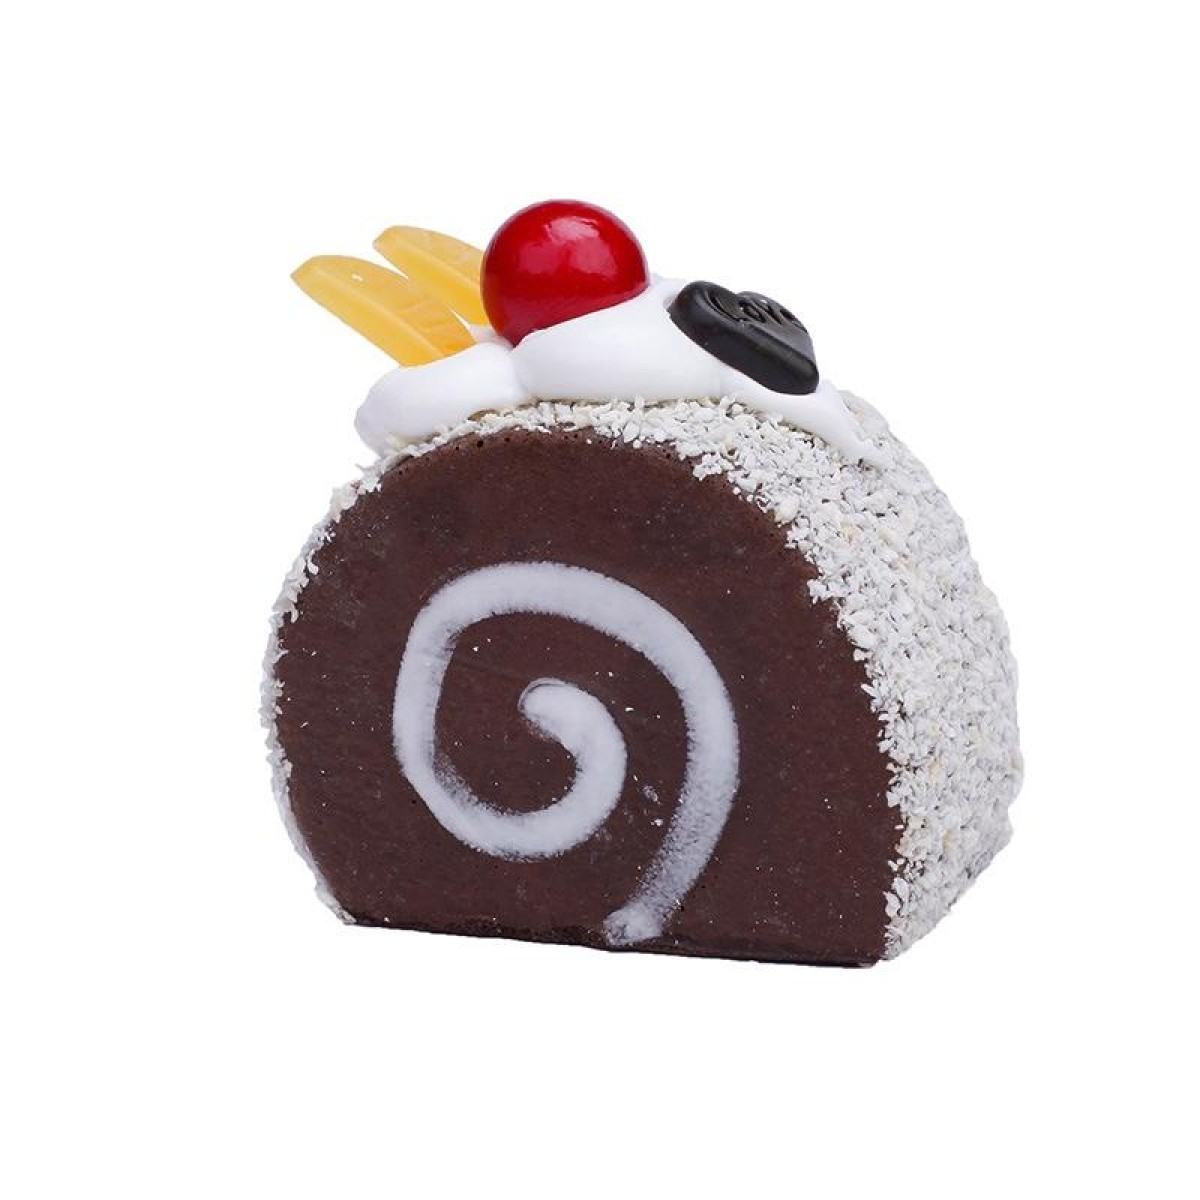 Simulation Egg Roll Cake Refrigerator Sticker Photography Props Decoration(Coffee With Powder)